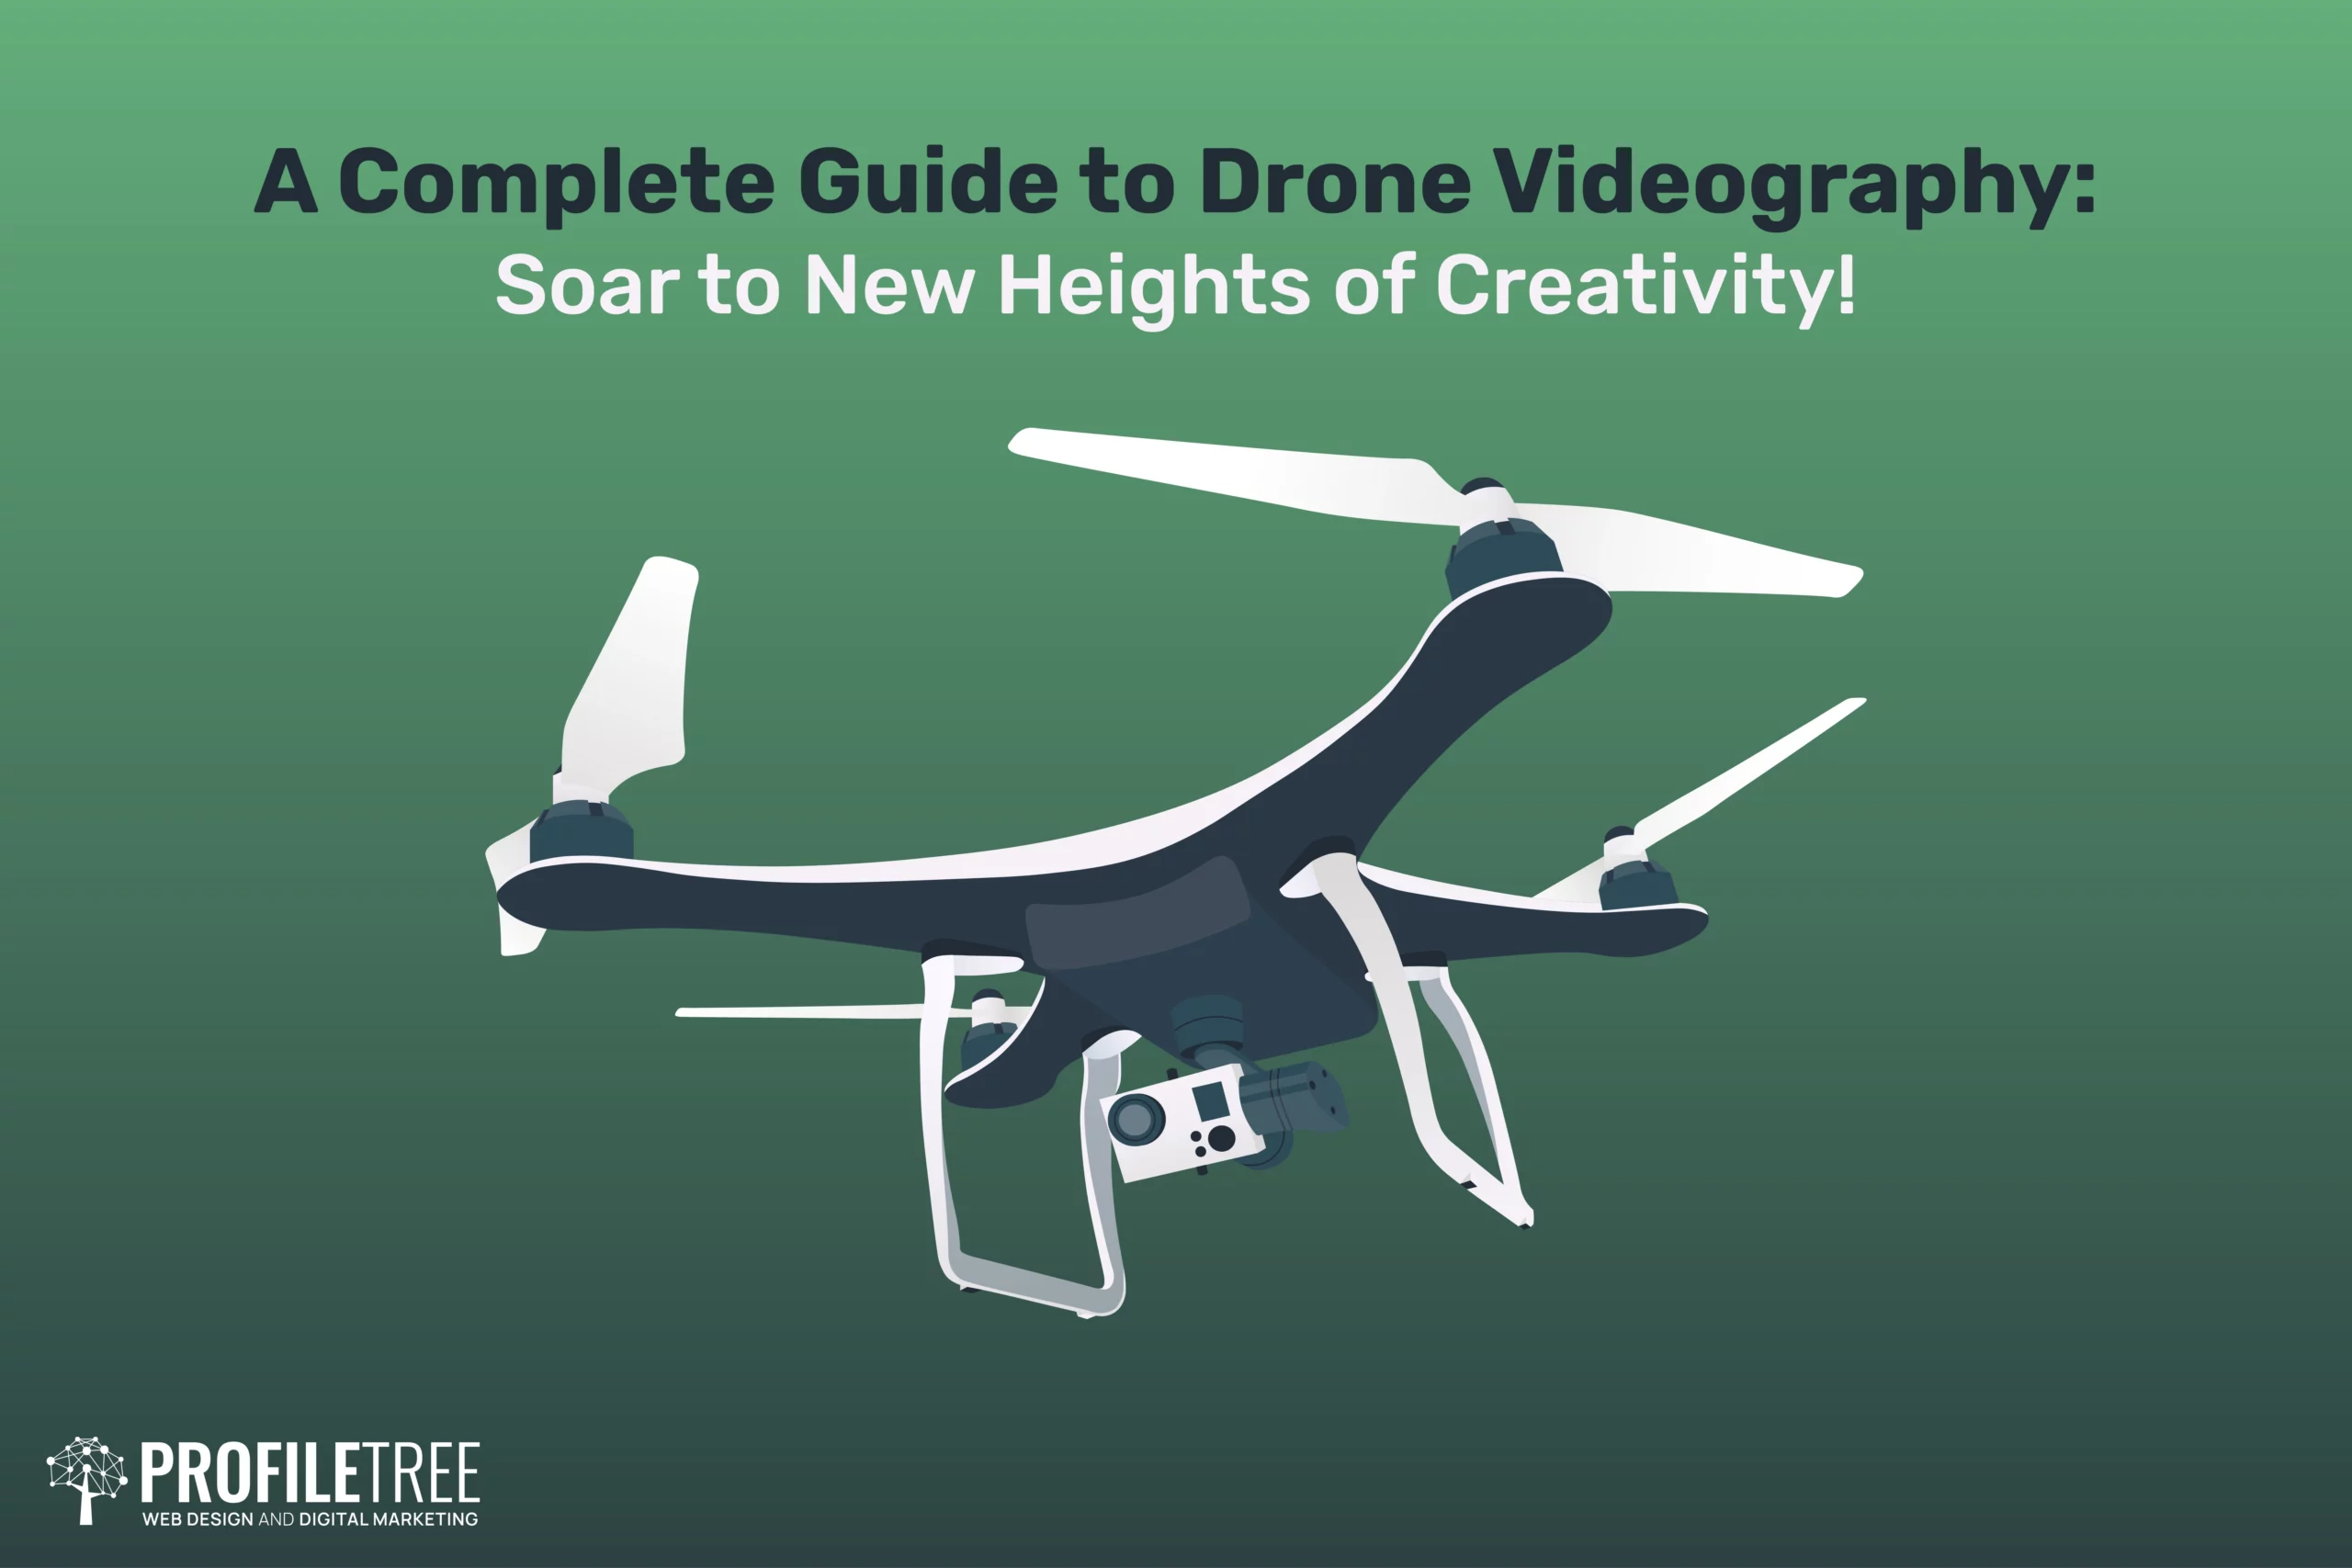 A Complete Guide to Drone Videography